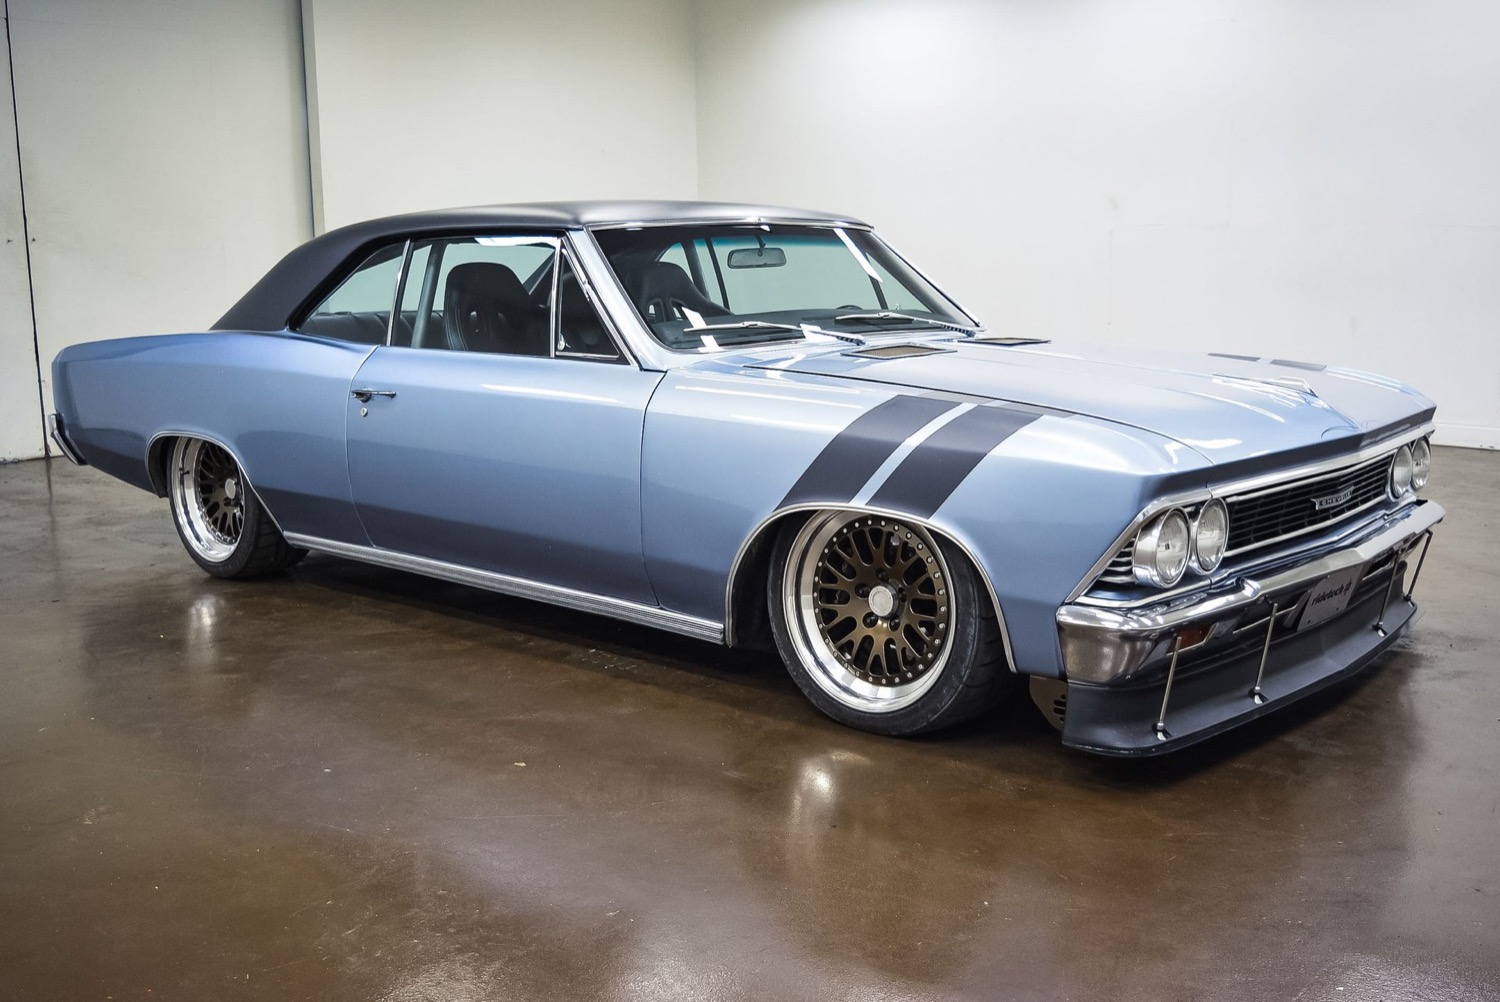 Slammed 1966 Chevy Malibu Pro Touring Up For Sale.